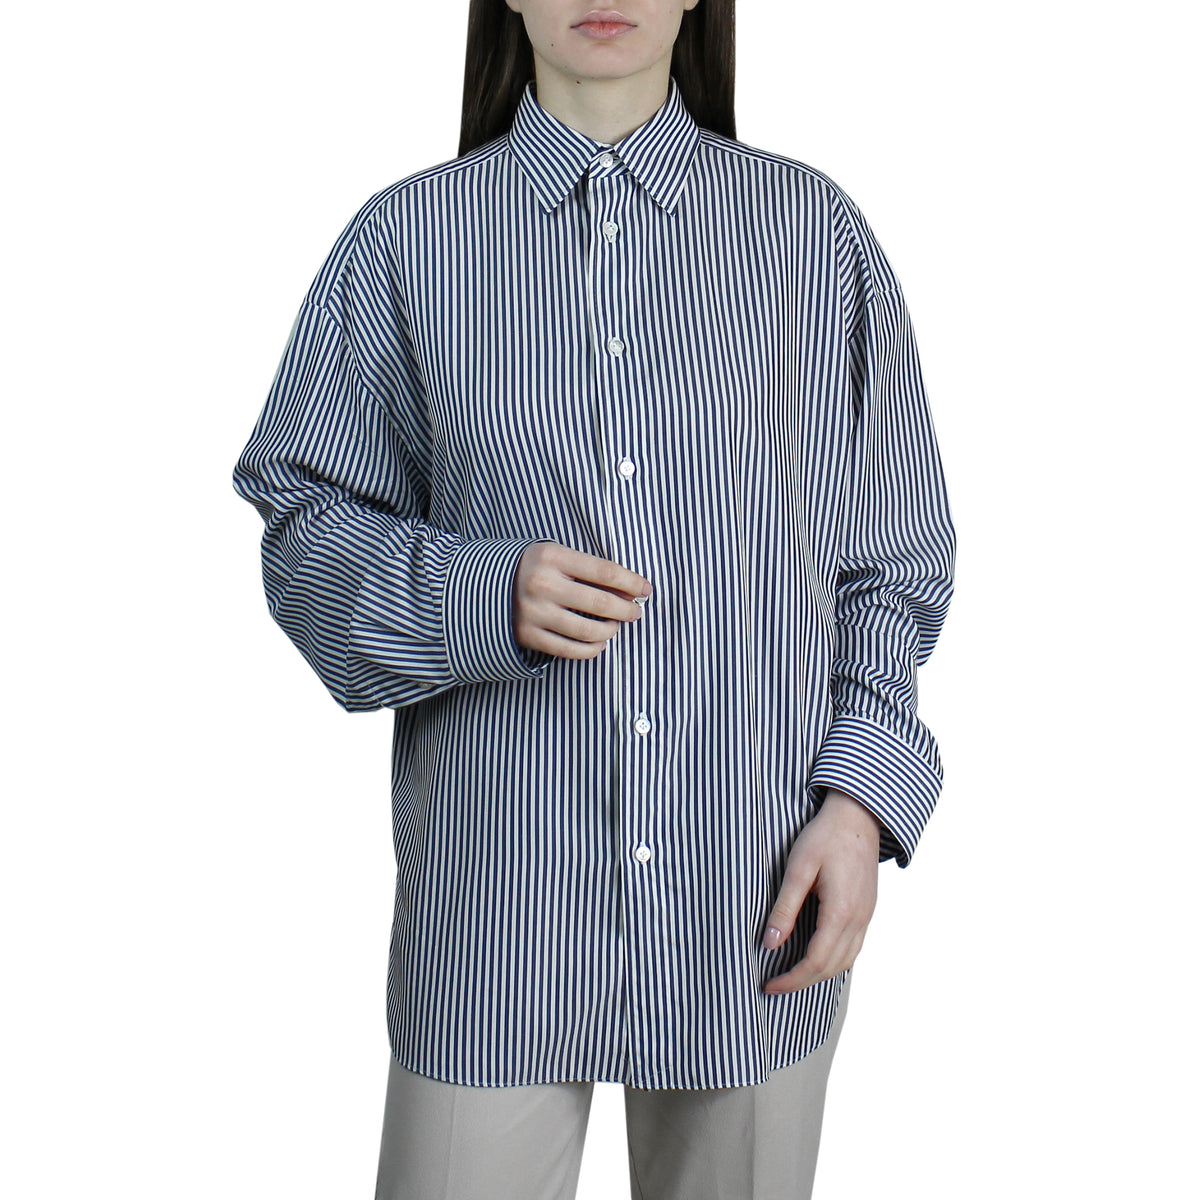 Women's over fit blue striped lyocell shirt